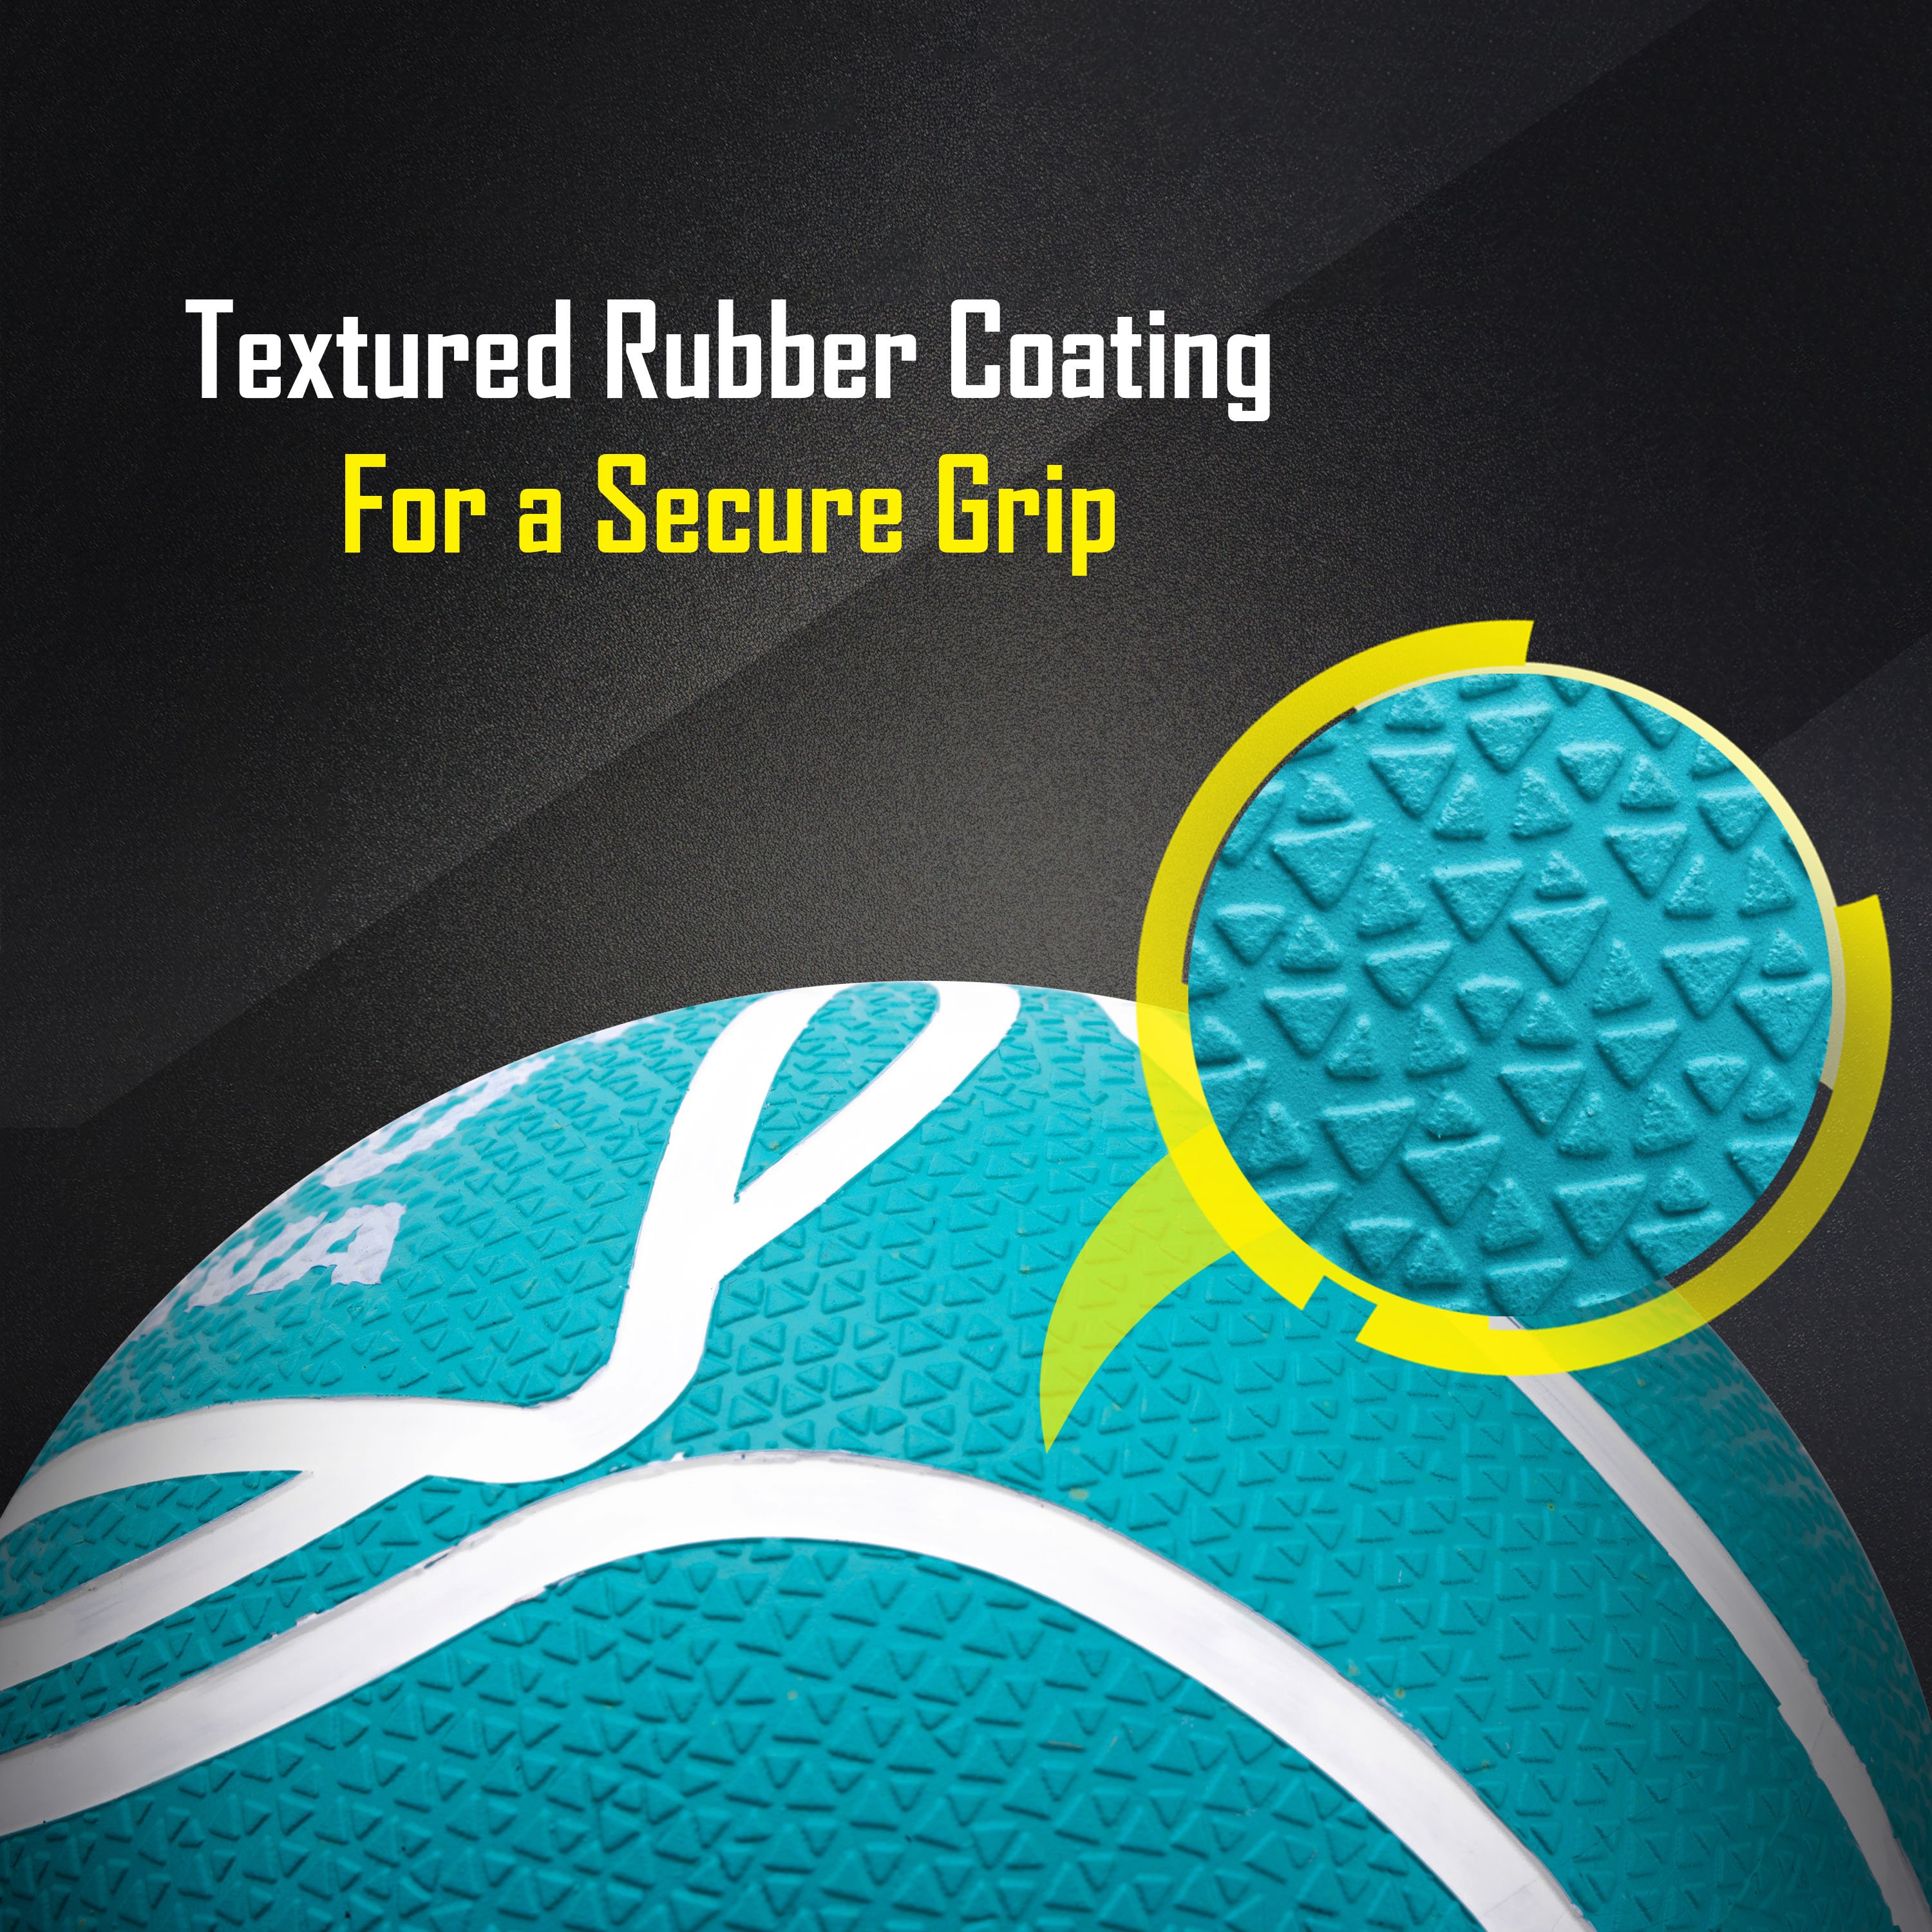 Textured rubber coating for a secure grip.